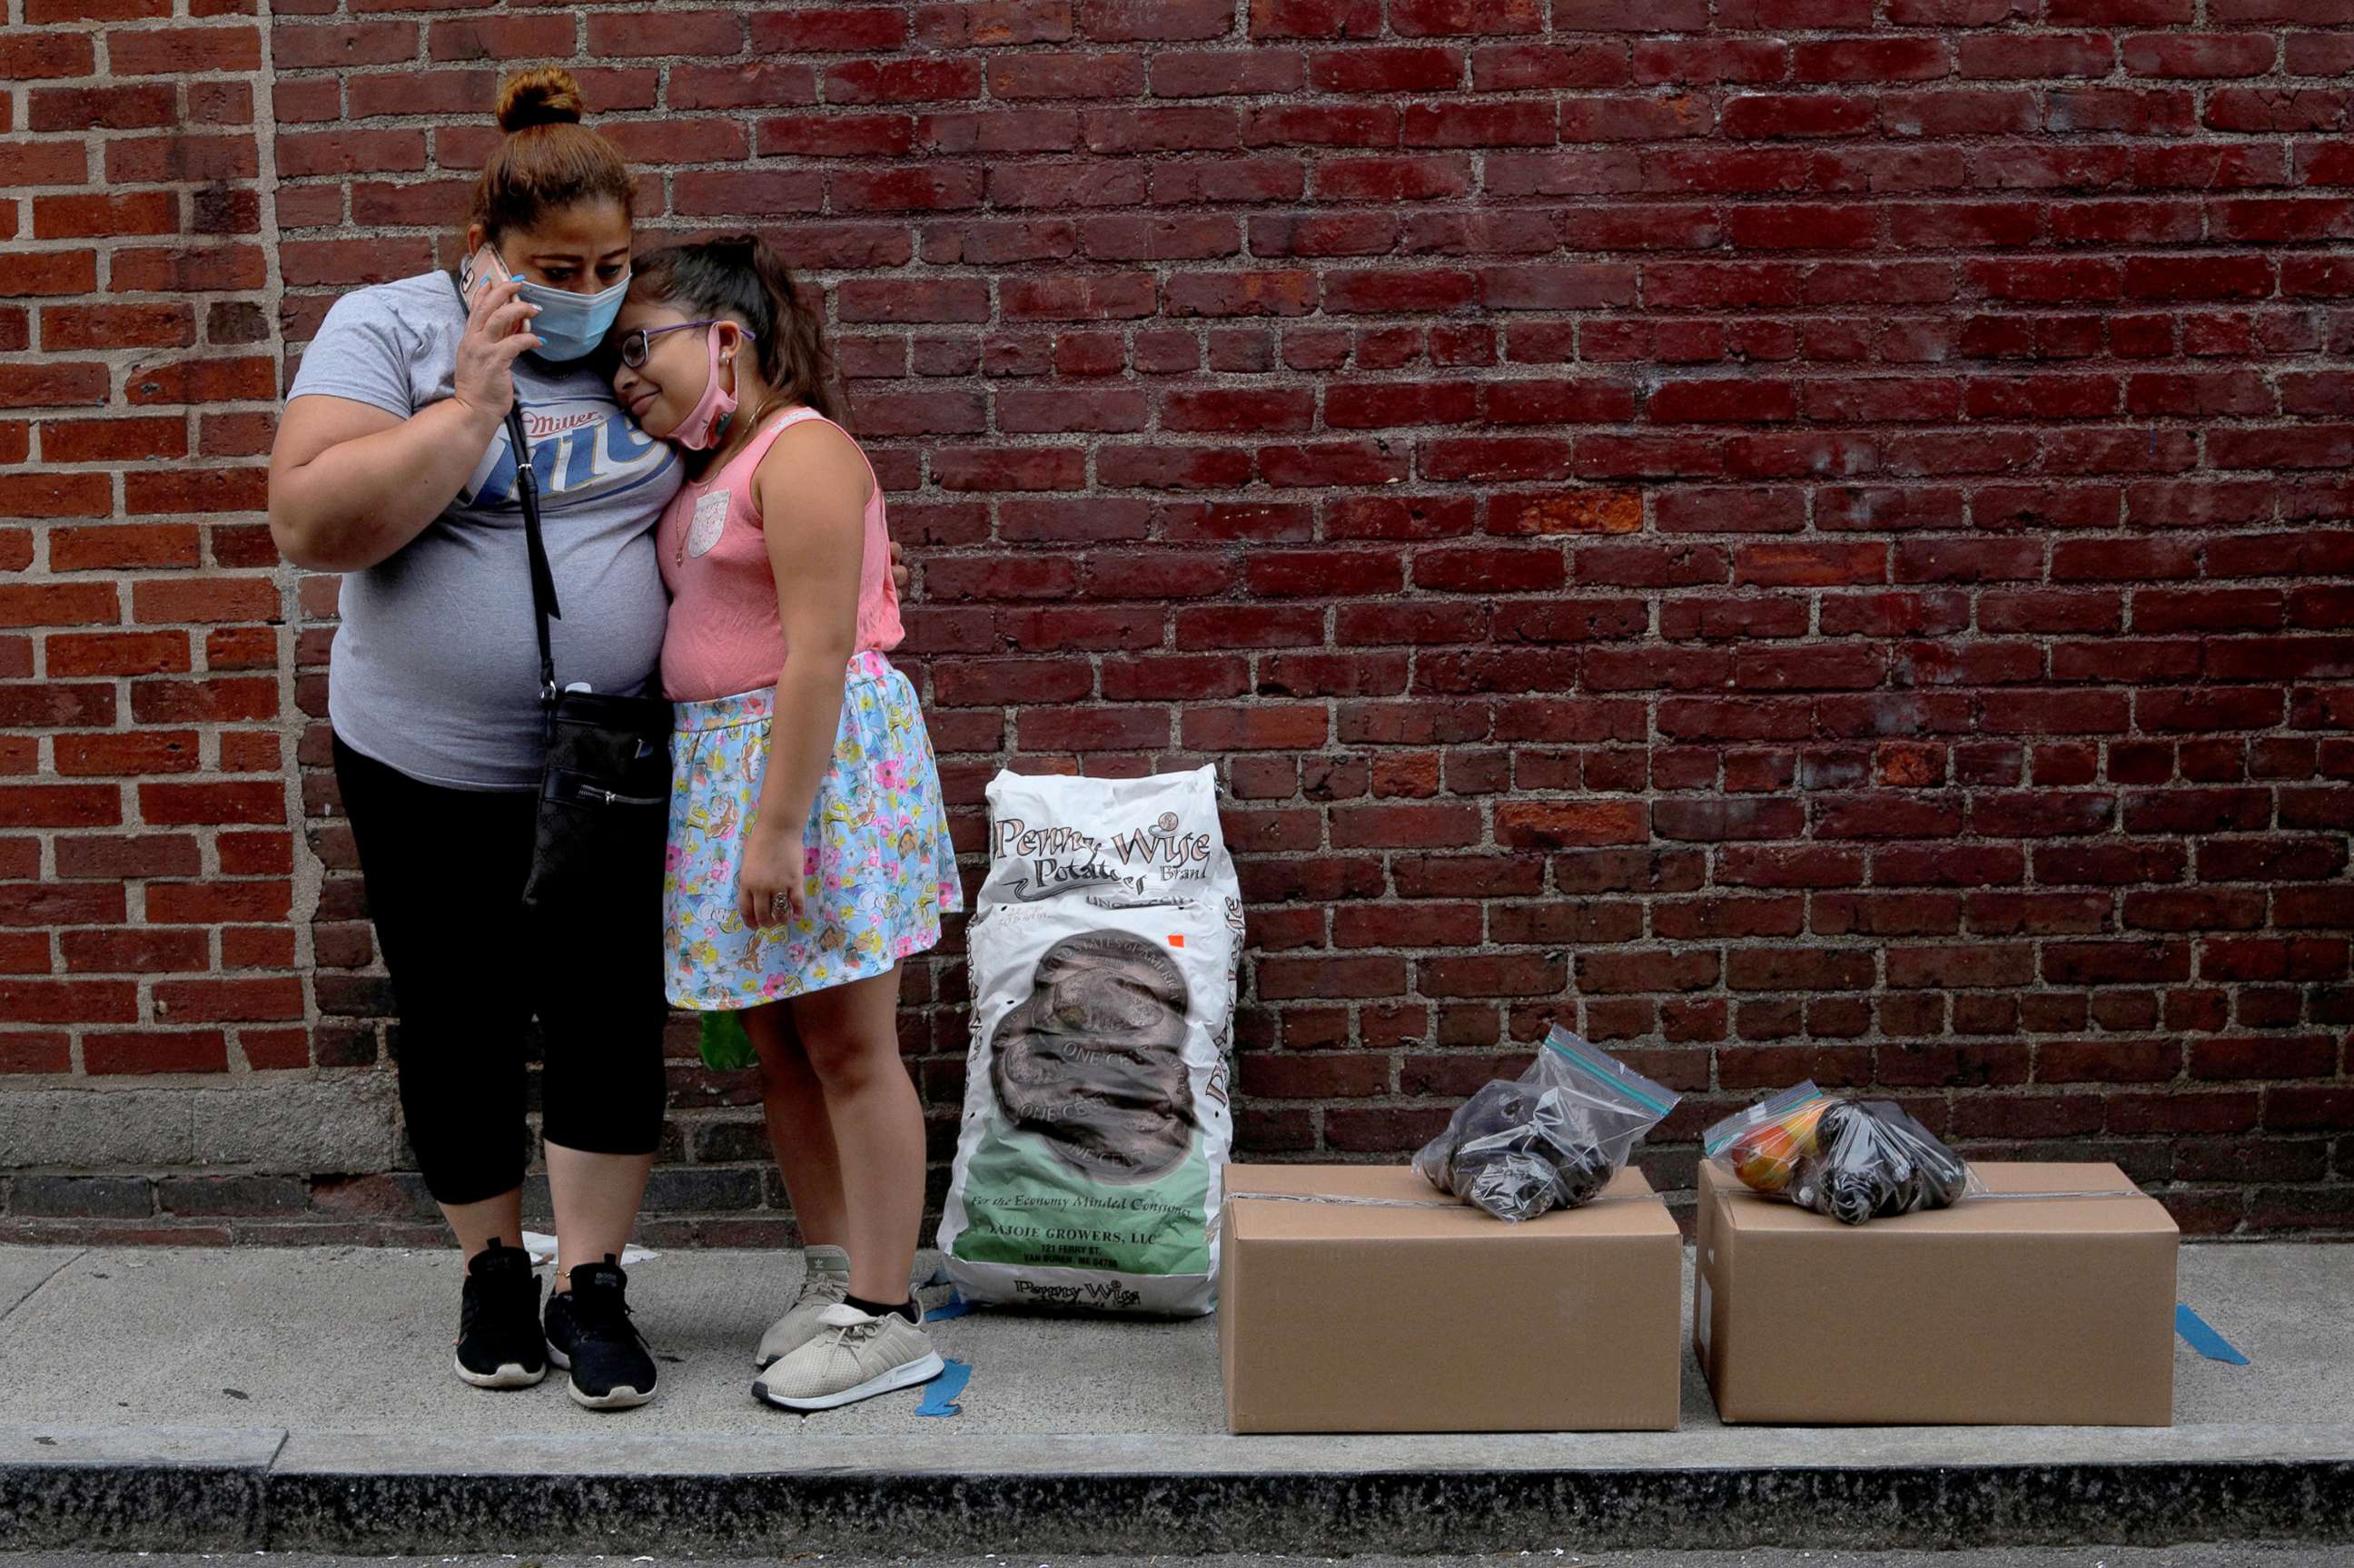 PHOTO: Sandra Cruz, who lost her job because of the COVID-19 pandemic and fell behind on her rent, waits for a ride with her daughter after picking up free groceries distributed a social services agency in Chelsea, Mass., July 22, 2020.